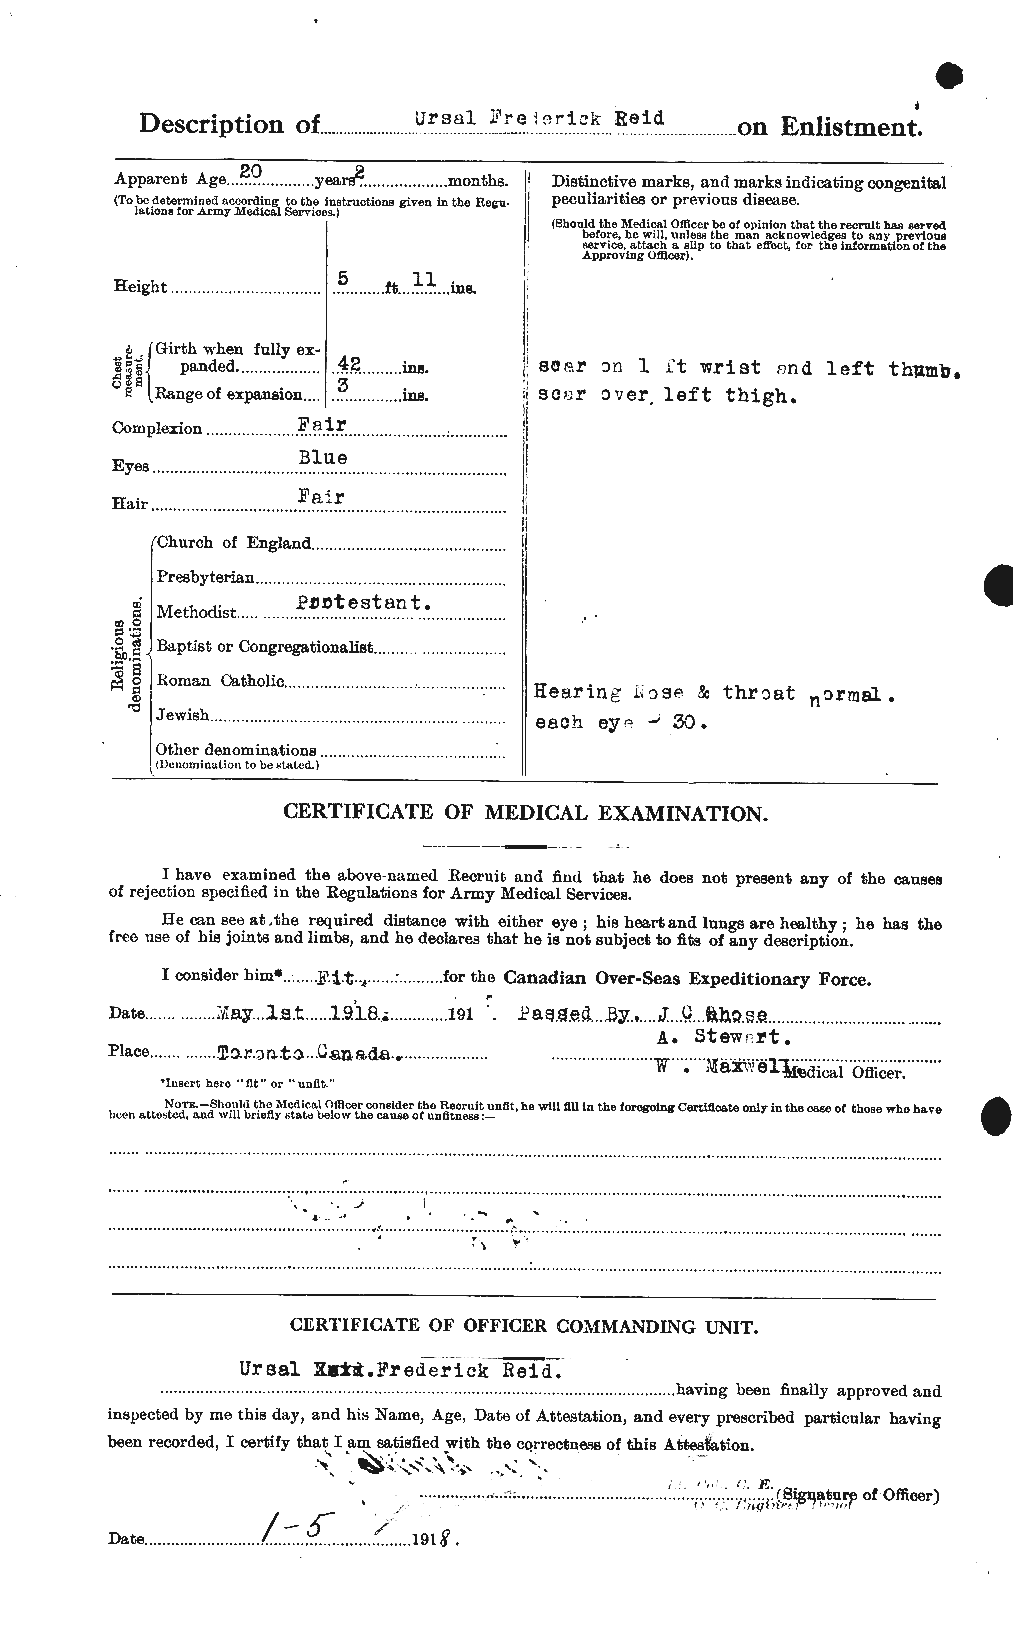 Personnel Records of the First World War - CEF 602010b